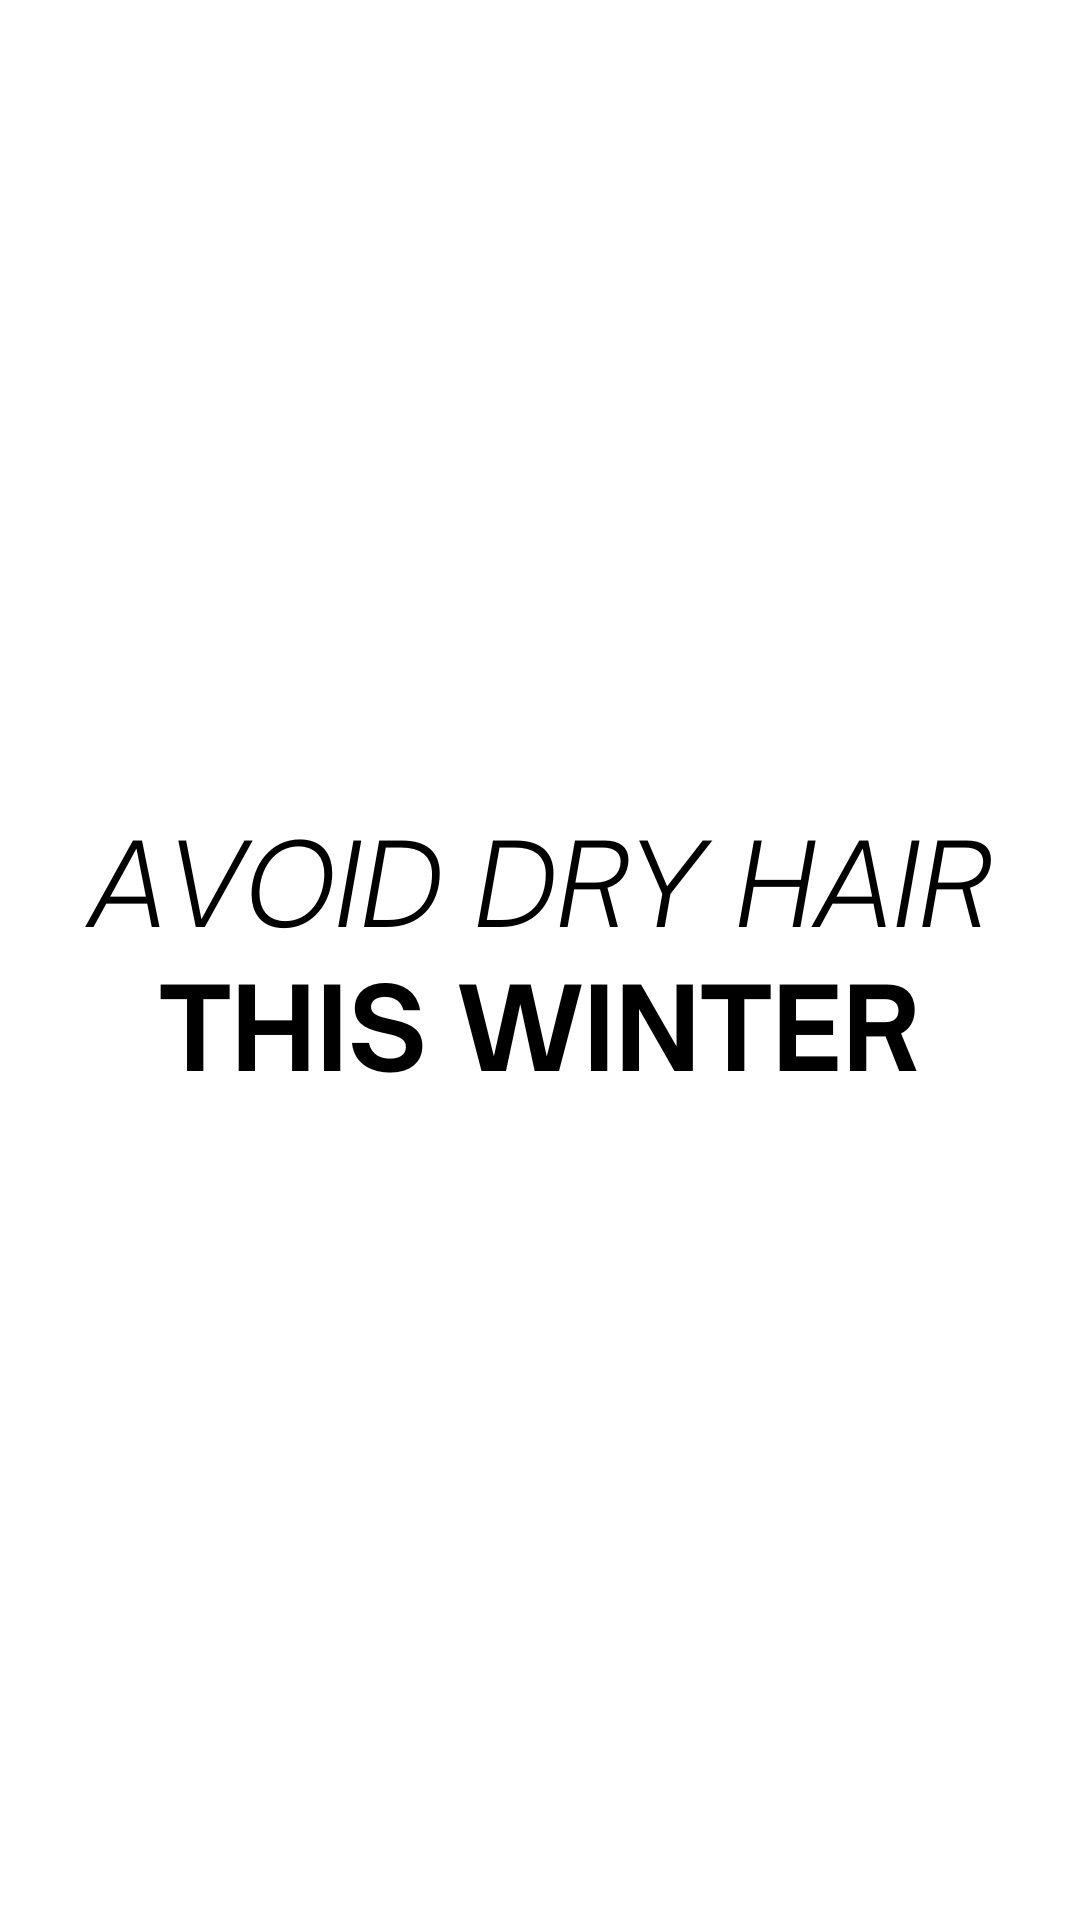 10 Ways To Avoid Dry Hair This Winter